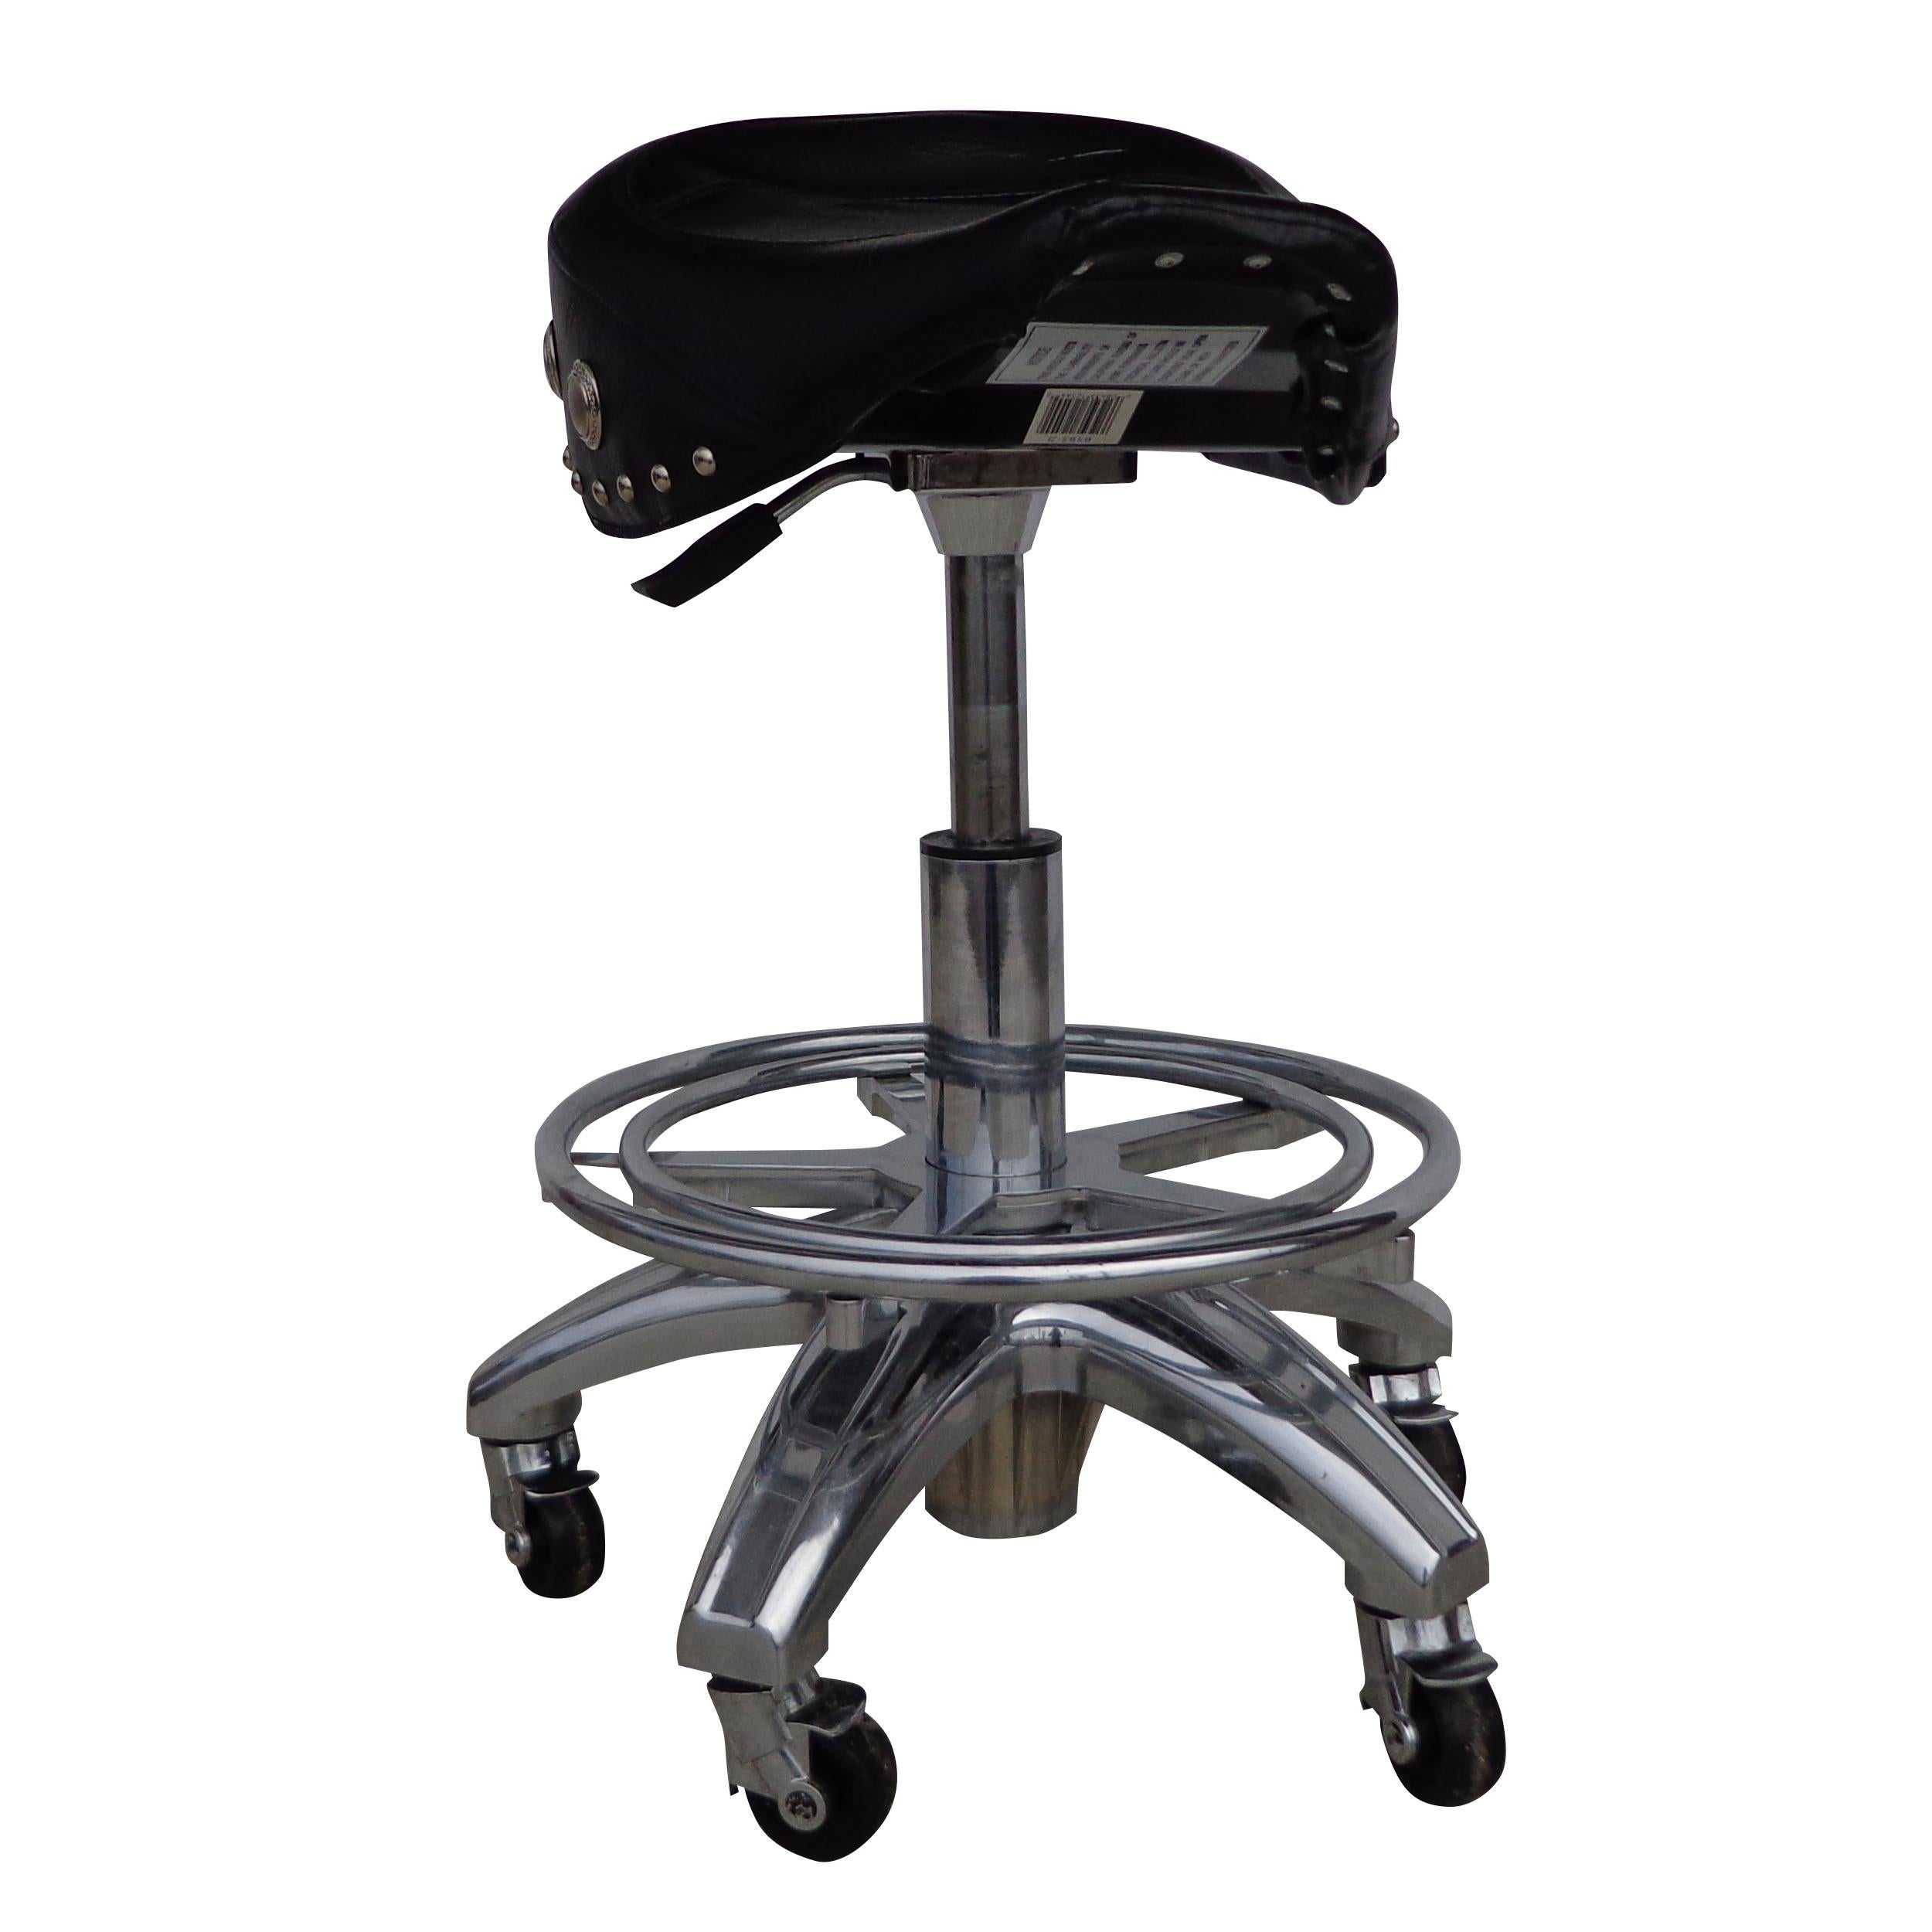 Larin leather saddle & chrome bar stool.

Unique saddle swivel stool with 360 ° swivel movement and pneumatic adjustable height from 21 to 28 inch.

5 Caster wheels for easy maneuverability.
 